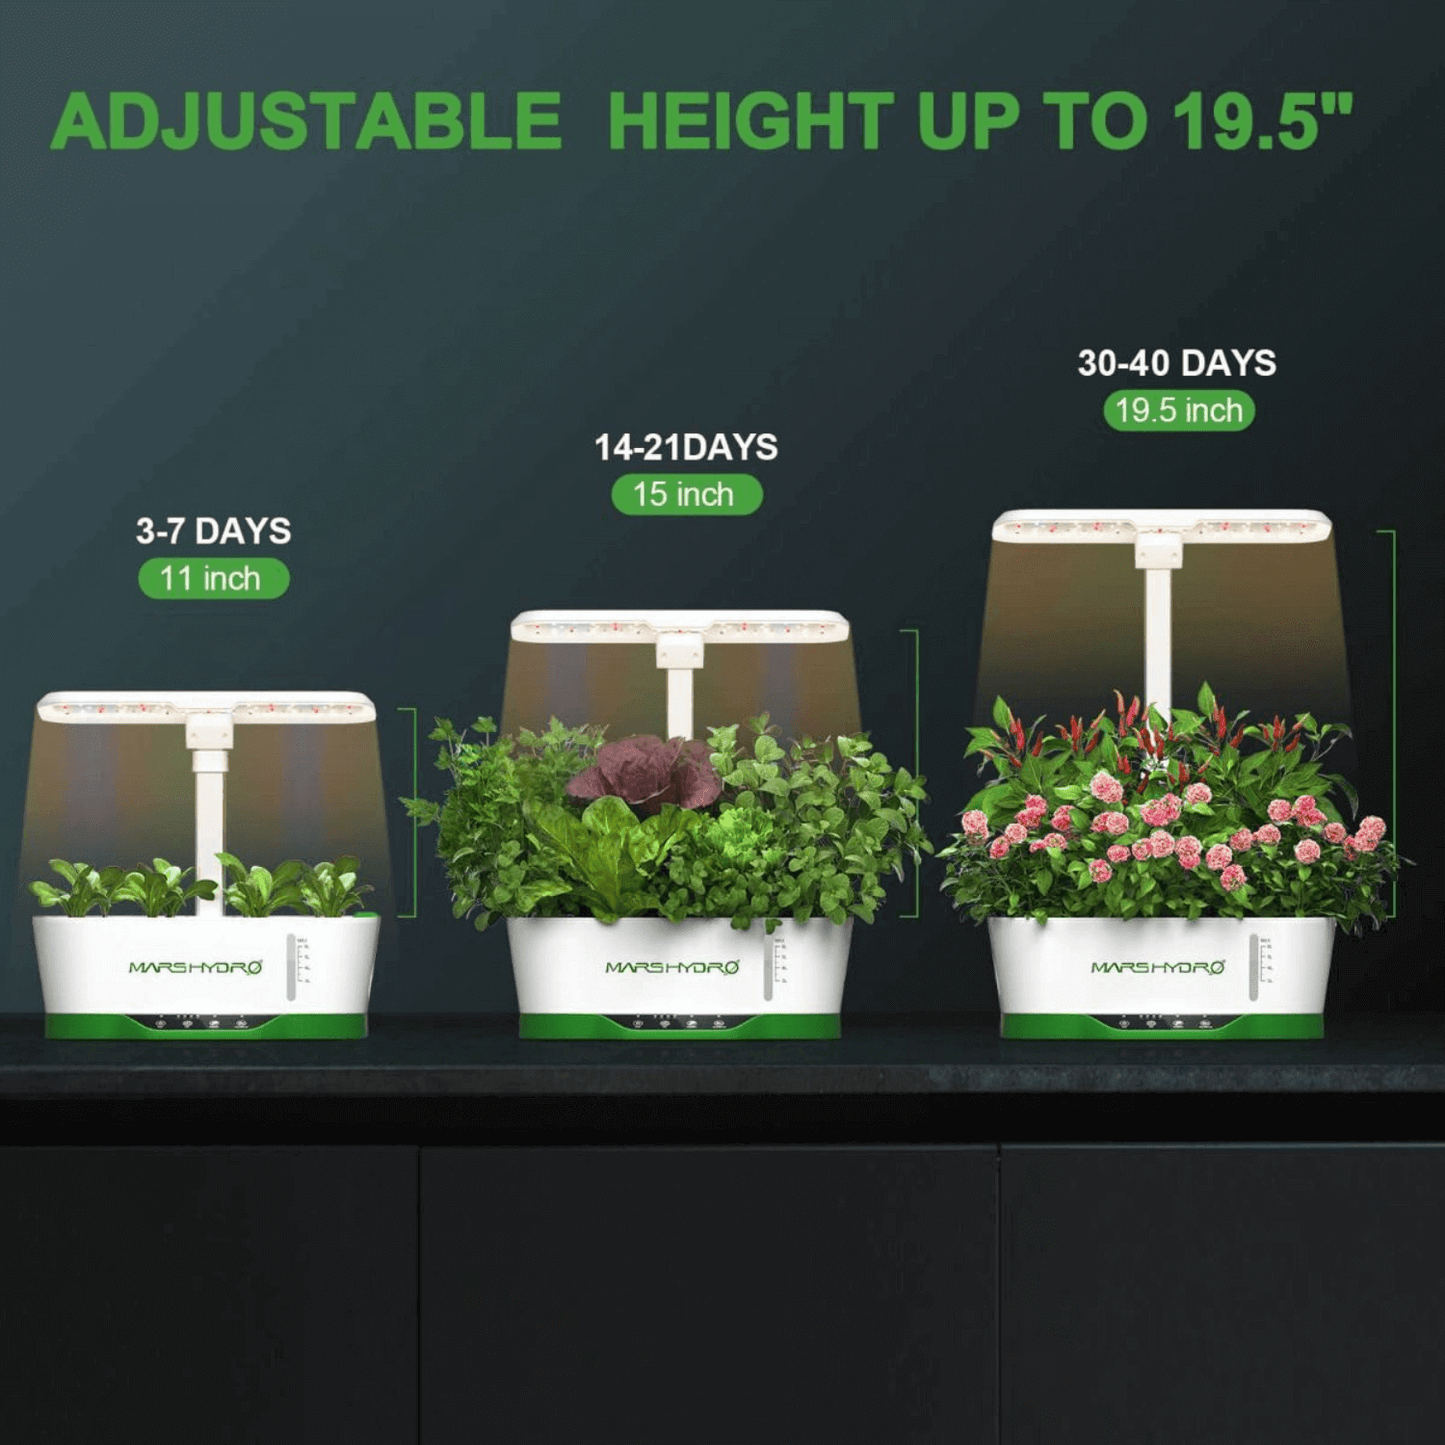 Mars Hydro Hydroline12 LED Hydroponics Growing System | MH-Hydroline12 | Grow Tents Depot | Planting & Watering | 686494406247